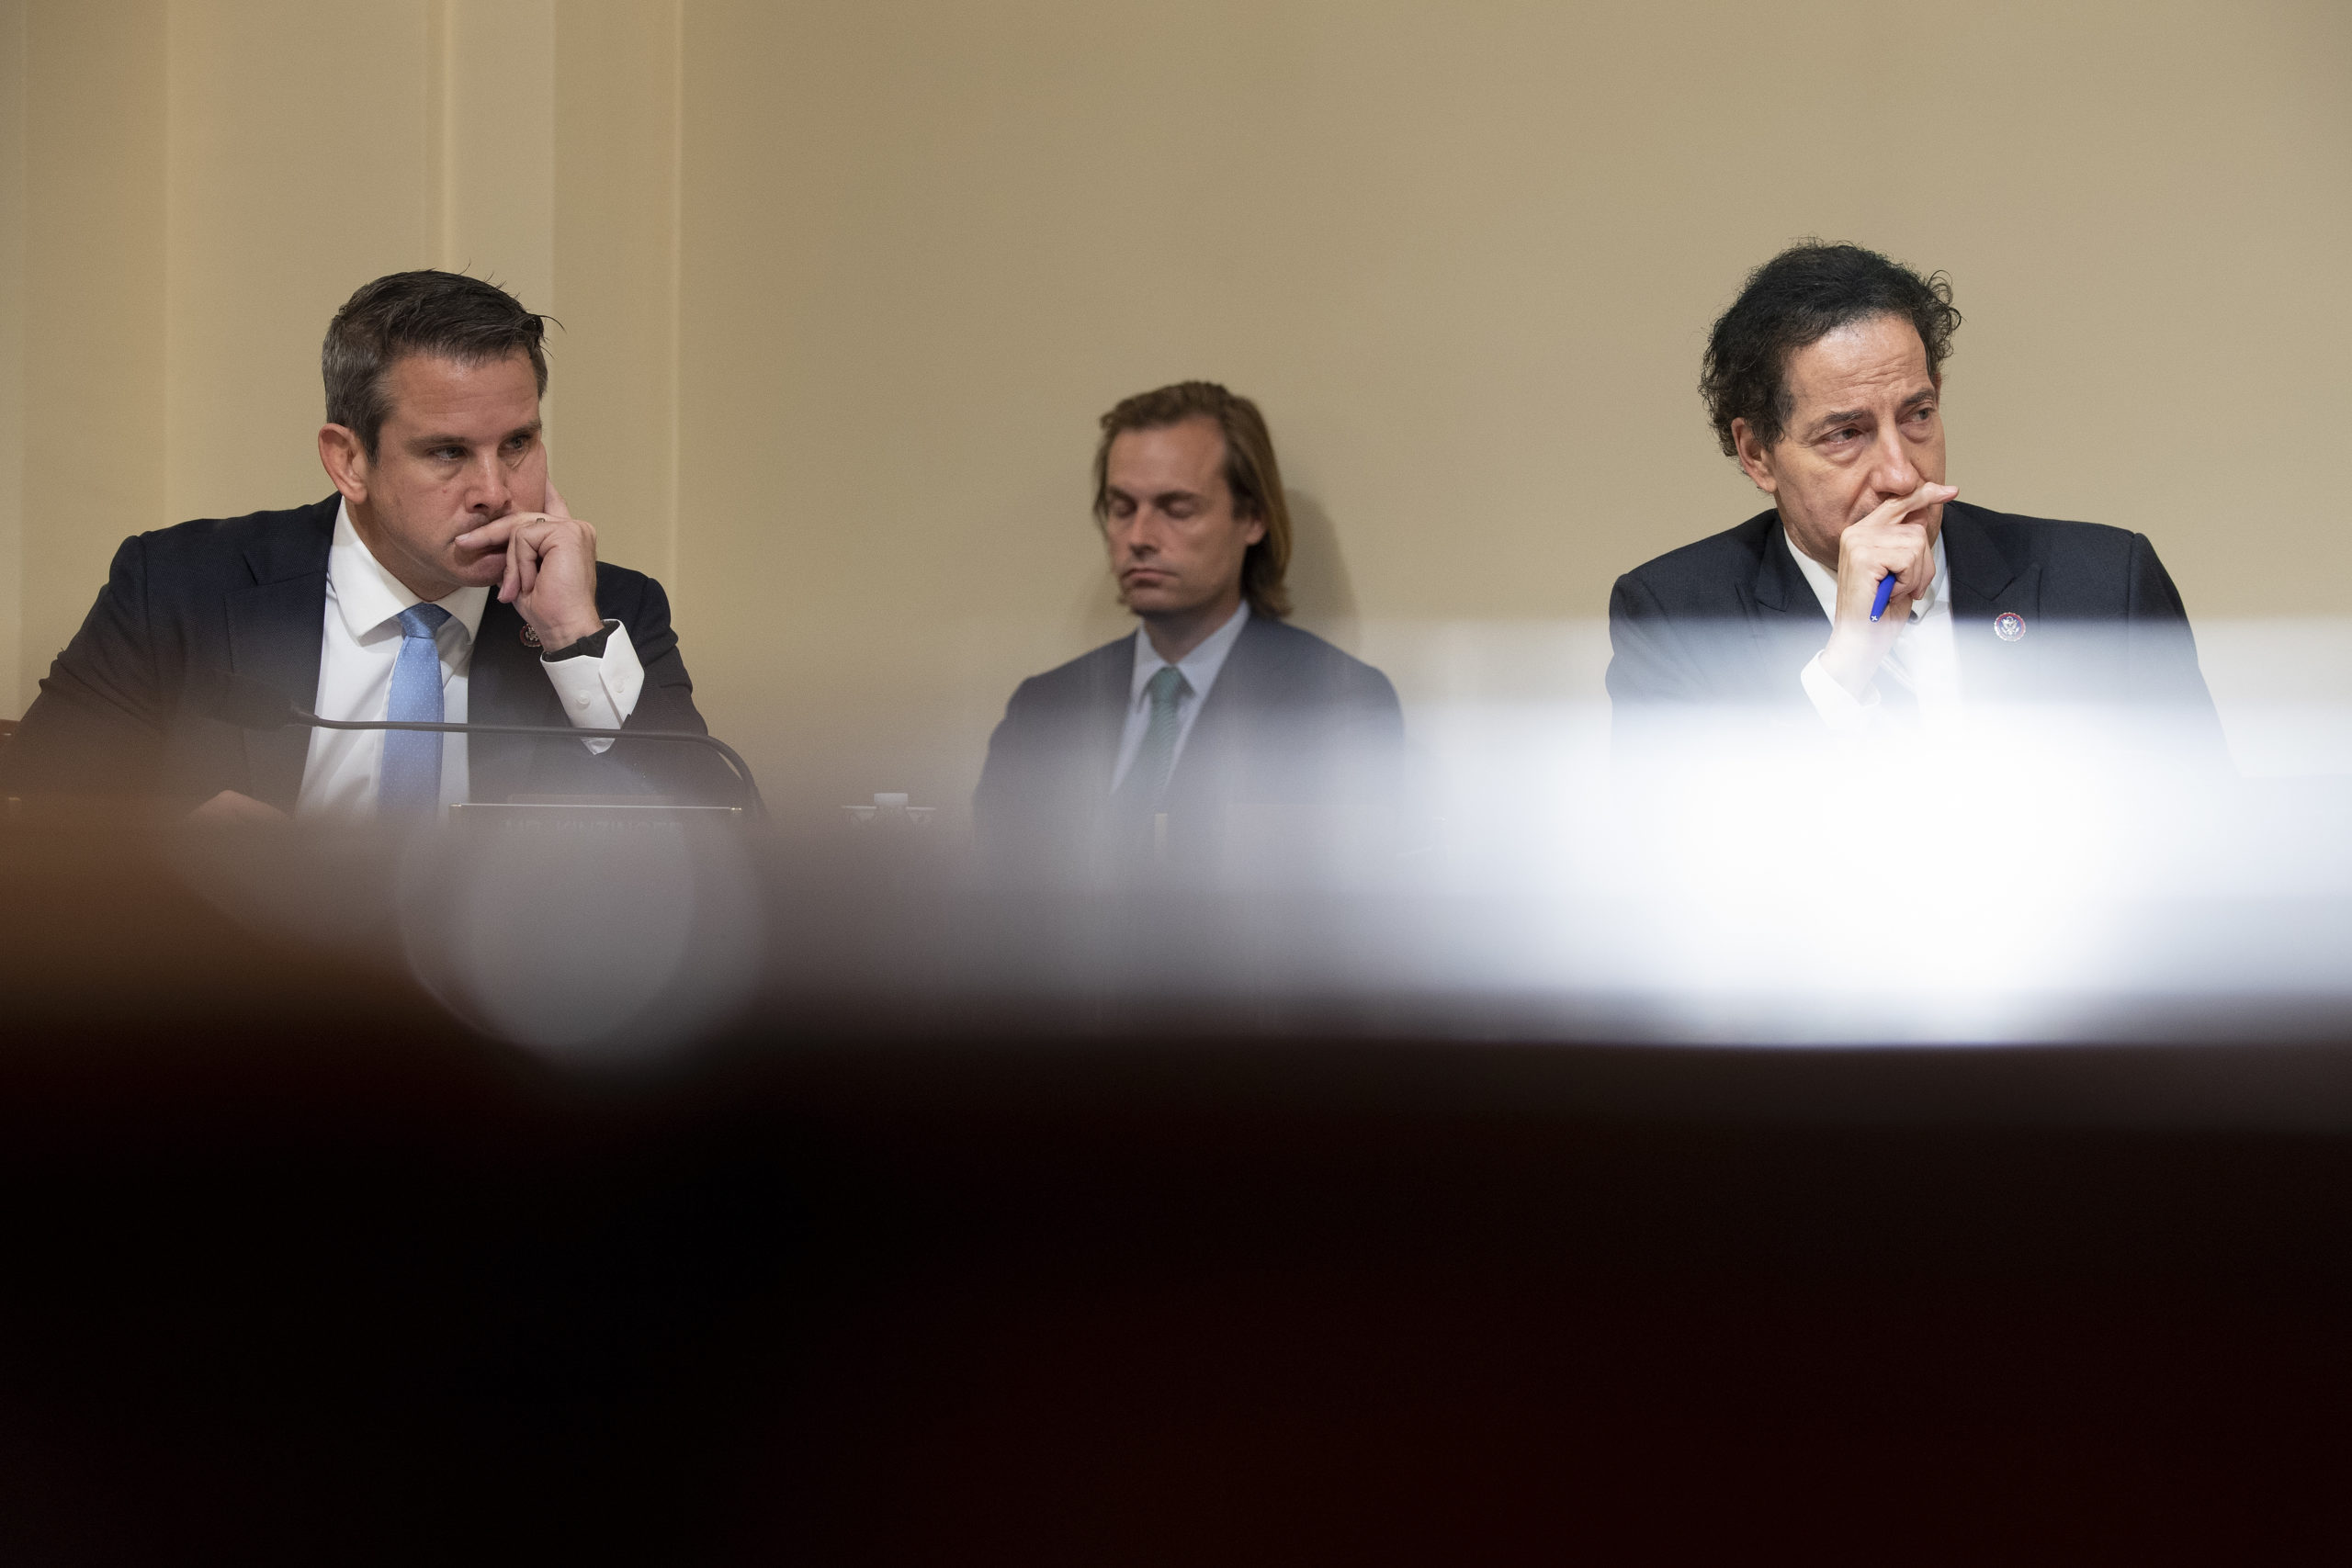 WASHINGTON, DC - JULY 27: Rep. Adam Kinzinger (R-IL) and Rep. Jamie Raskin (D-MD) listen during a hearing of the House select committee investigating the January 6 attack on the U.S. Capitol on July 27, 2021 at the Cannon House Office Building in Washington, DC. Members of law enforcement testified about the attack by supporters of former President Donald Trump on the U.S. Capitol. According to authorities, about 140 police officers were injured when they were trampled, had objects thrown at them, and sprayed with chemical irritants during the insurrection.(Photo by Brendan Smialowski-Pool/Getty Images)